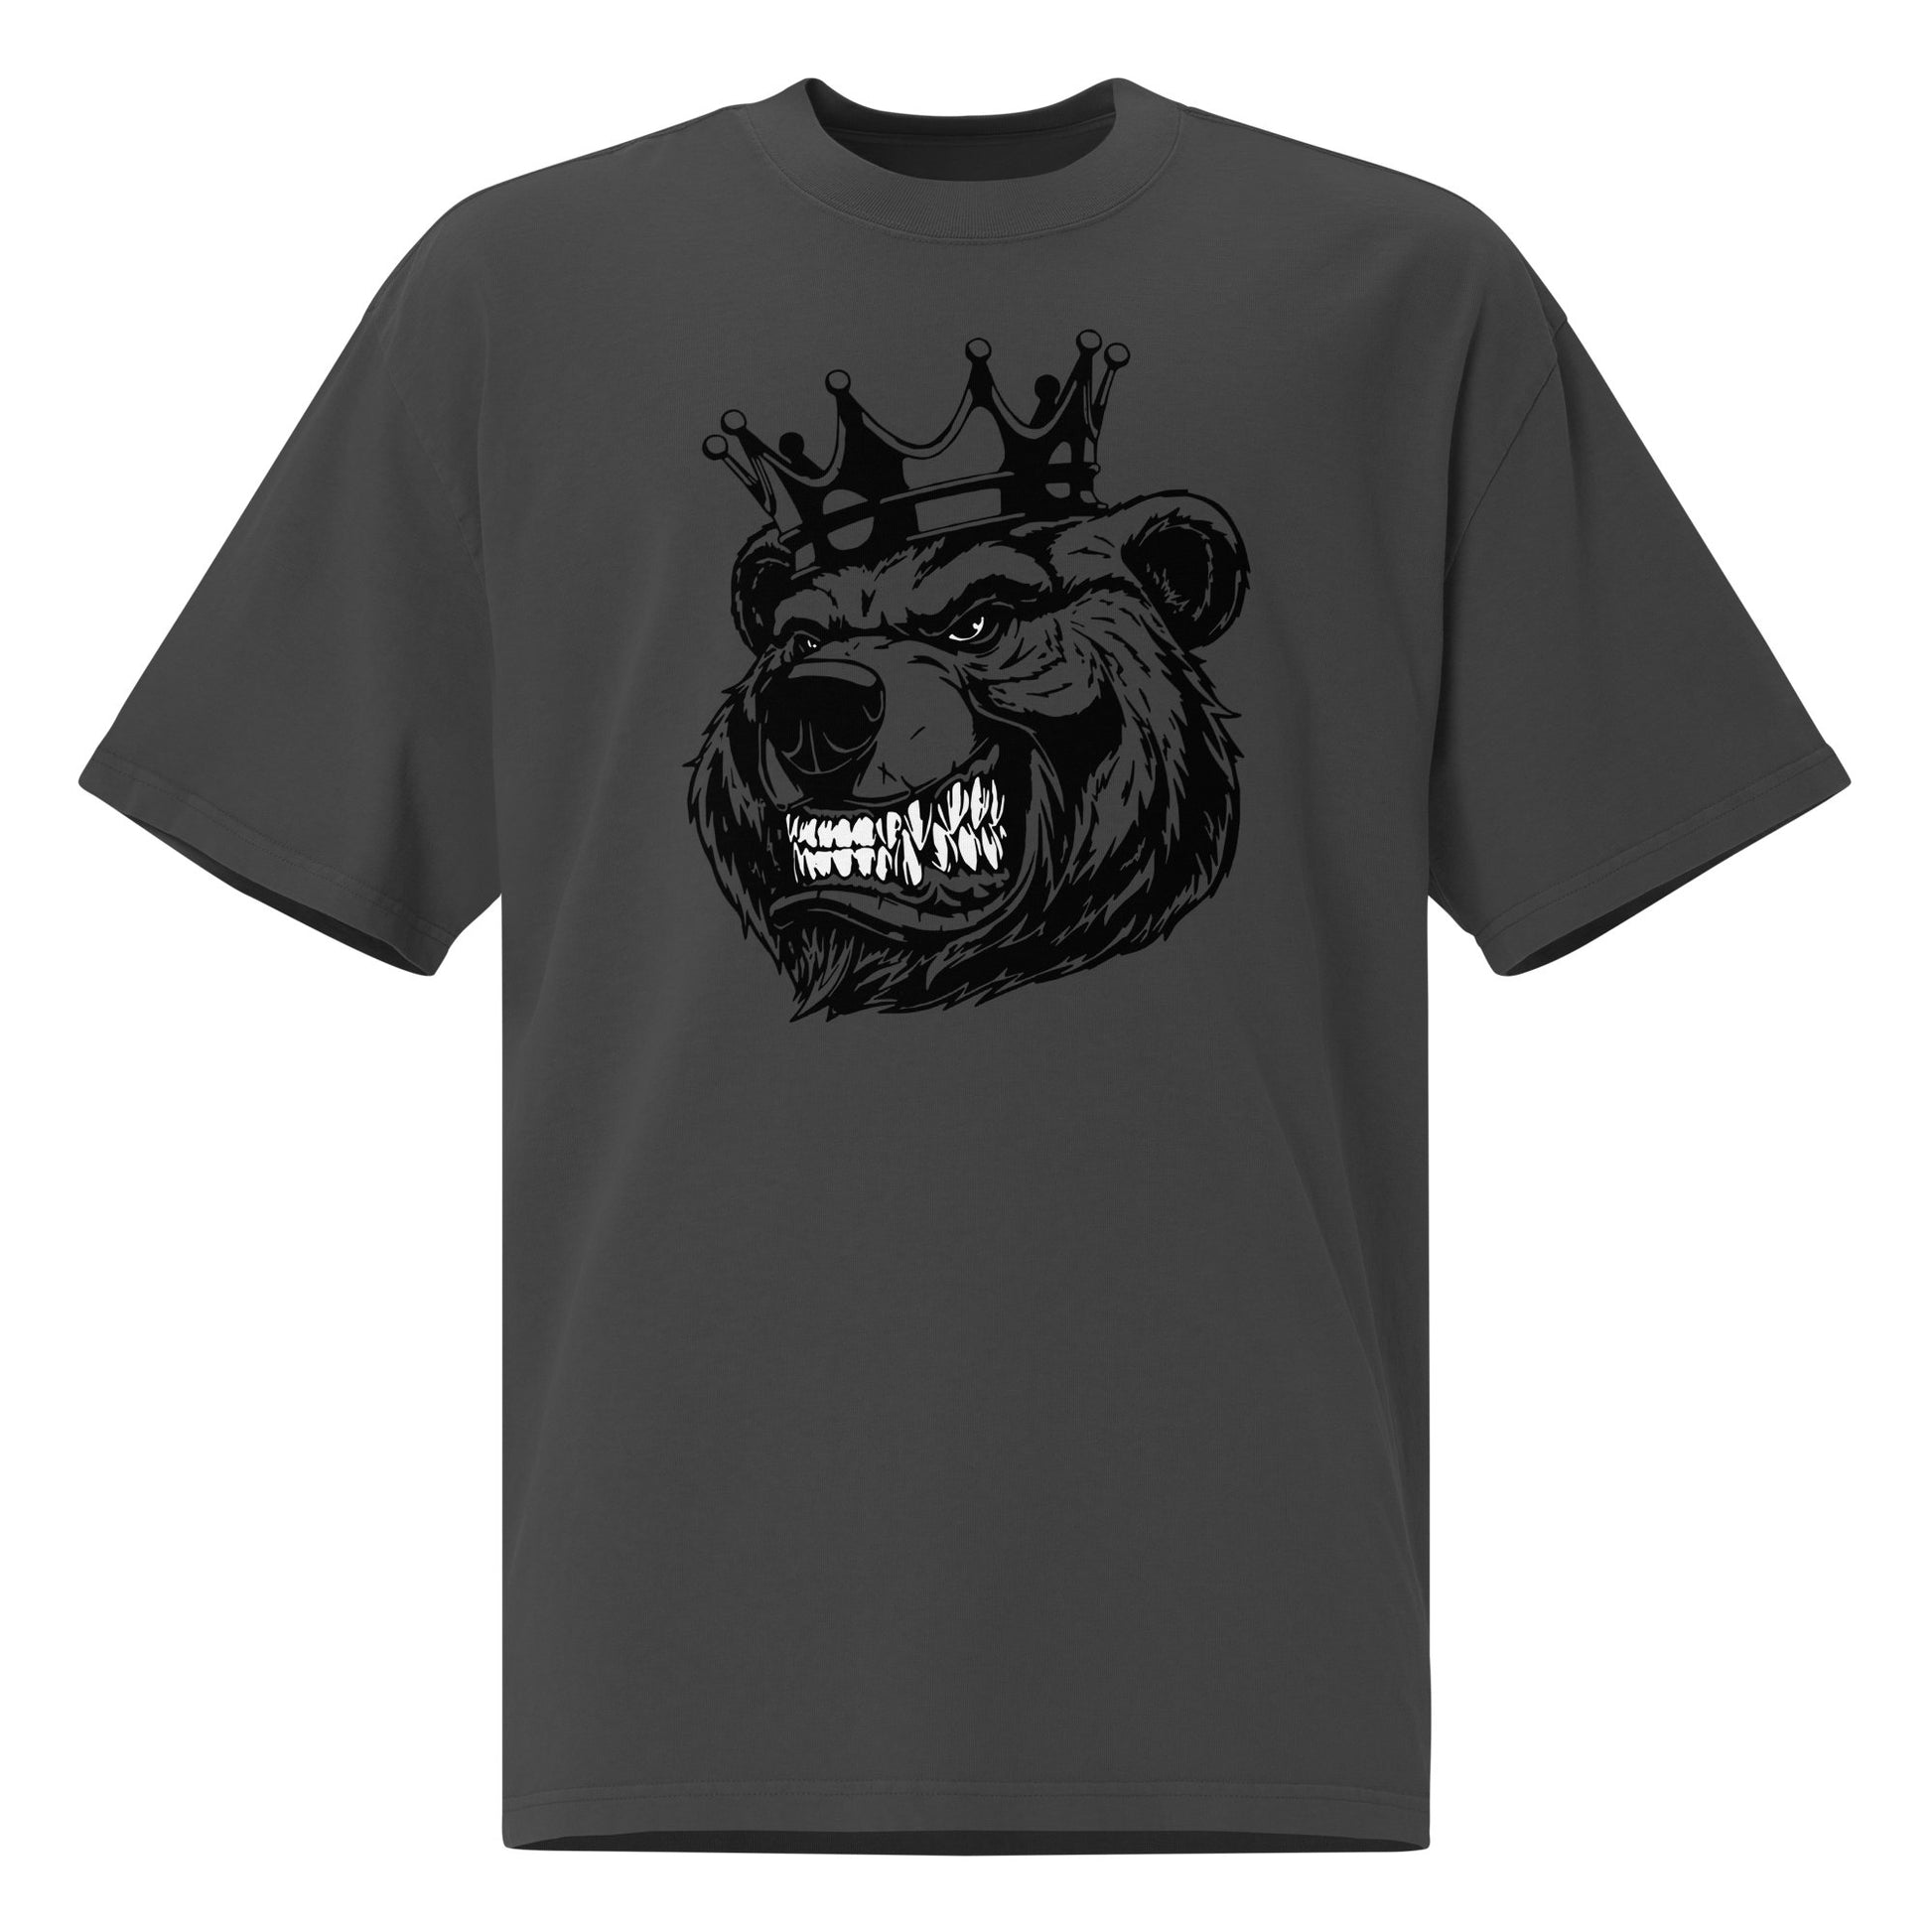 Black print bear with crown oversized faded t-shirt. - Bearclothing